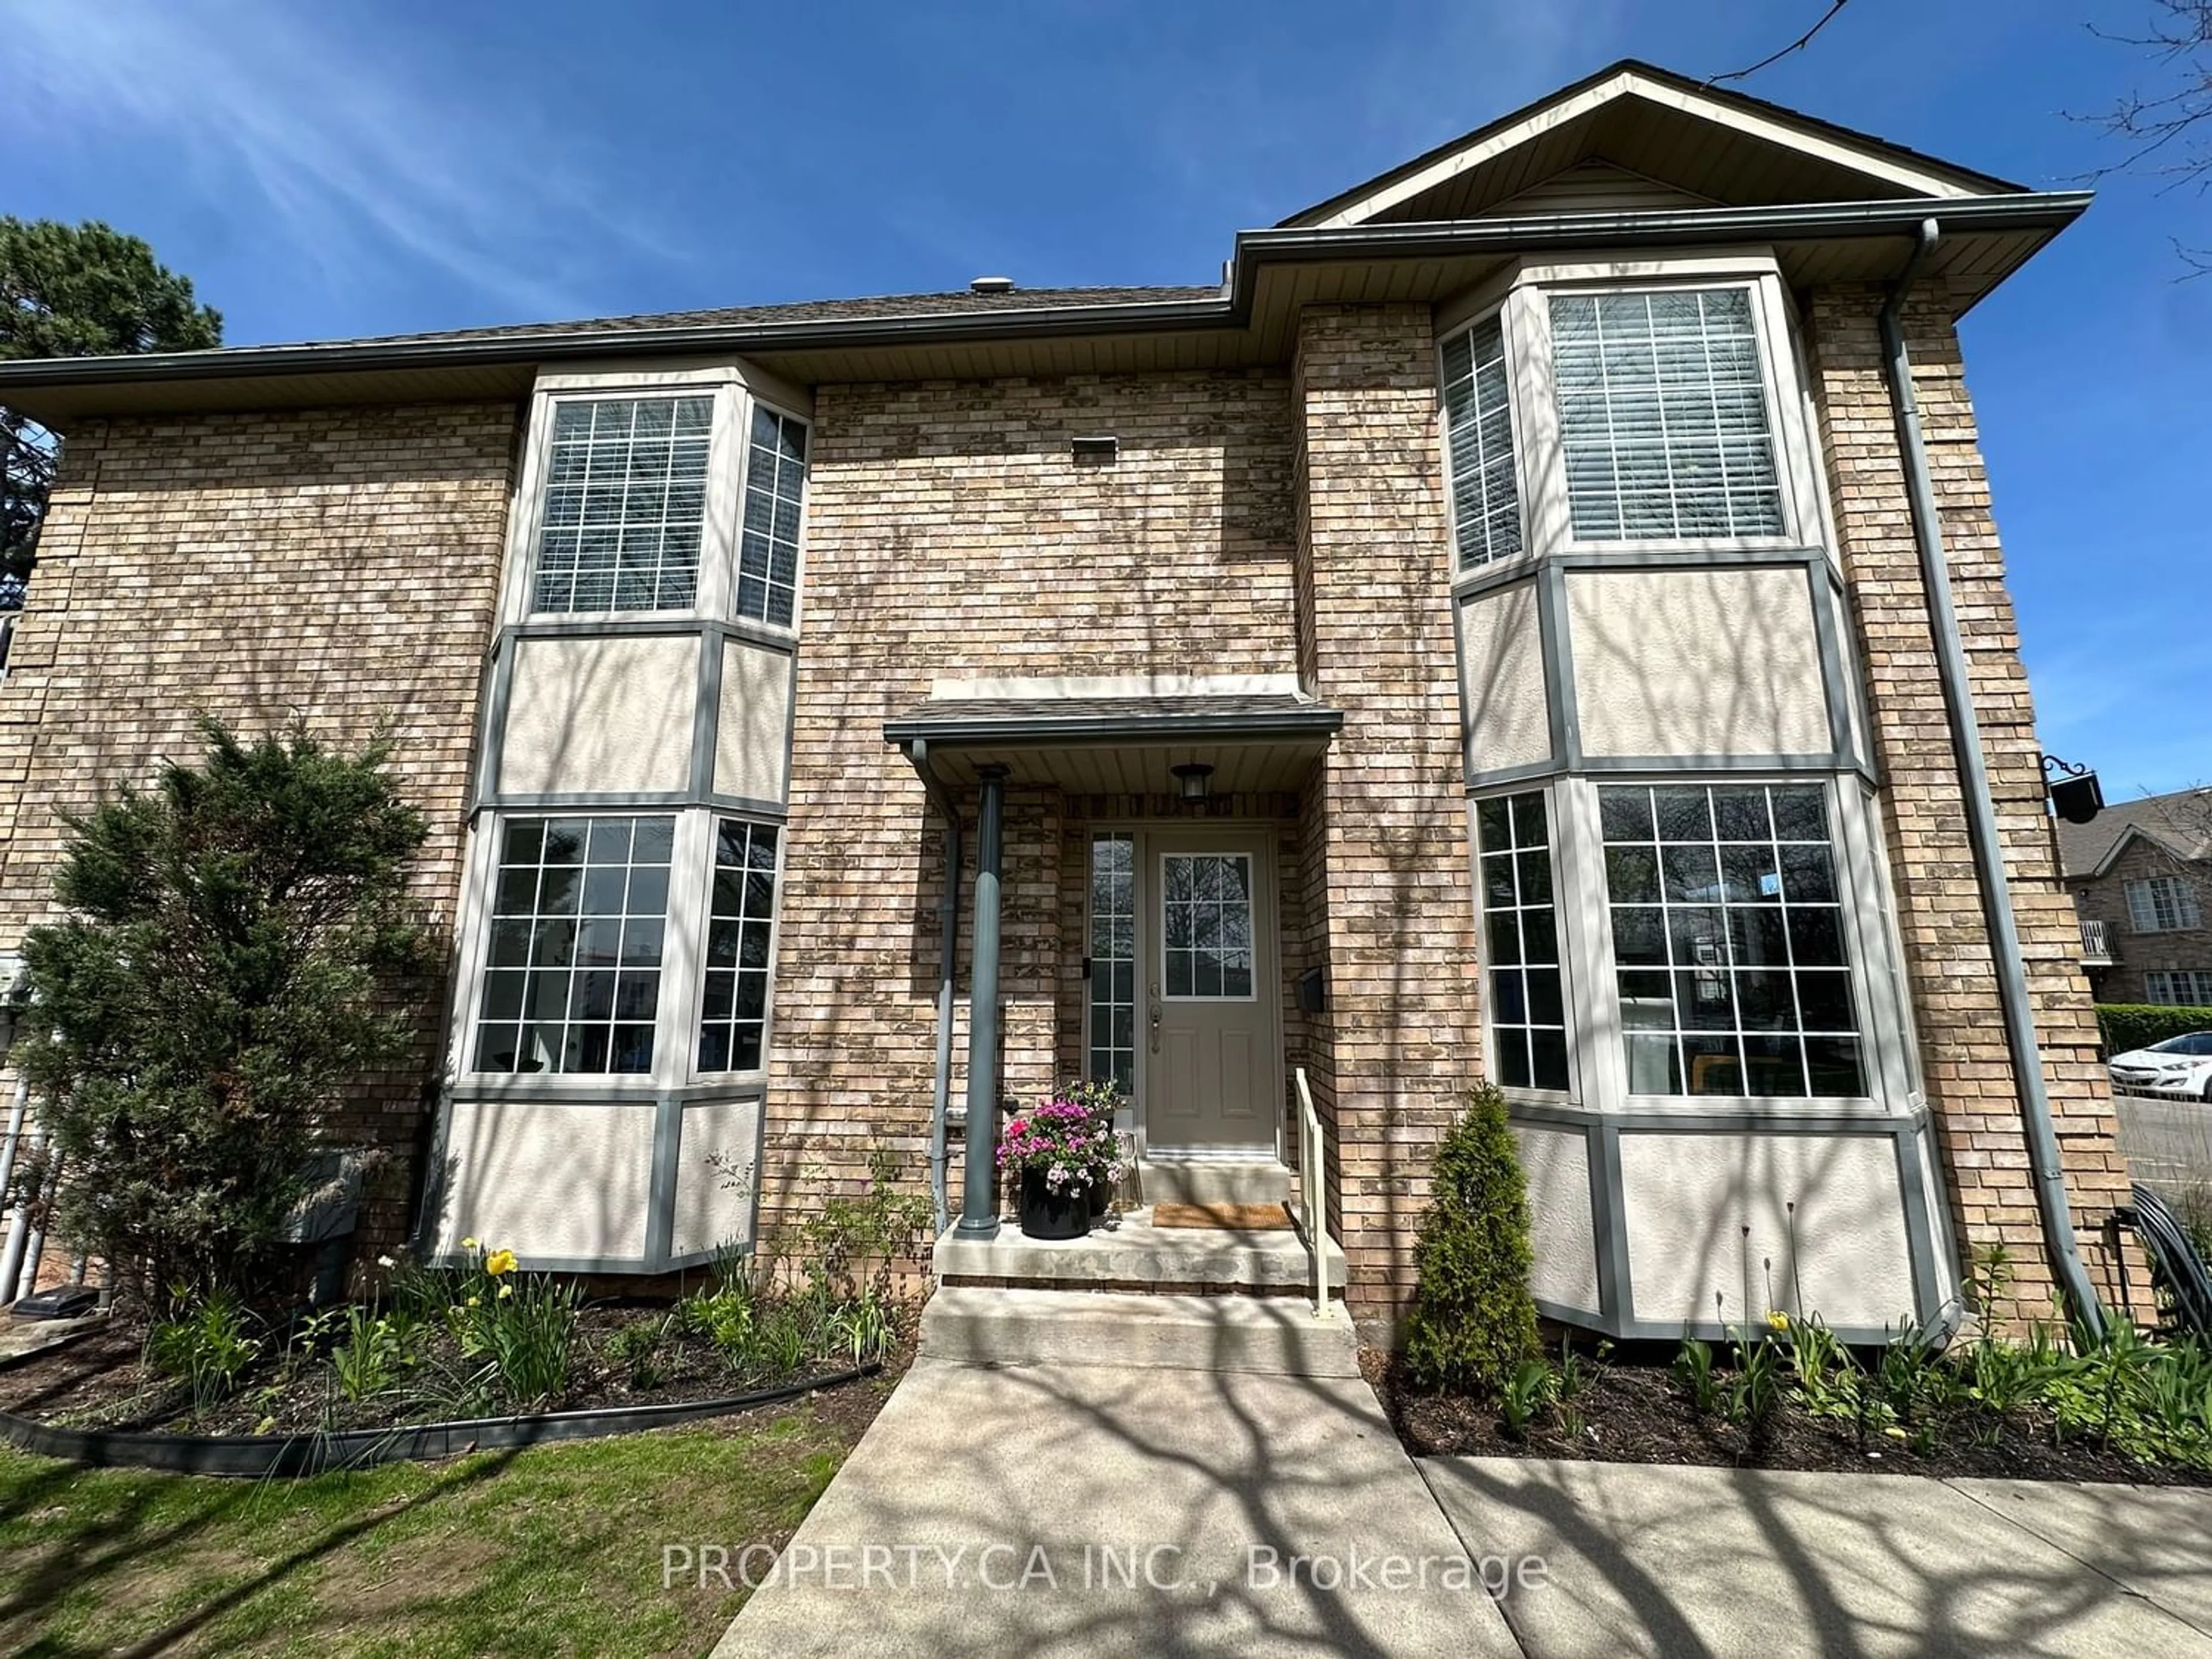 Home with brick exterior material for 705 Cumberland Ave #29, Burlington Ontario L7N 3X4